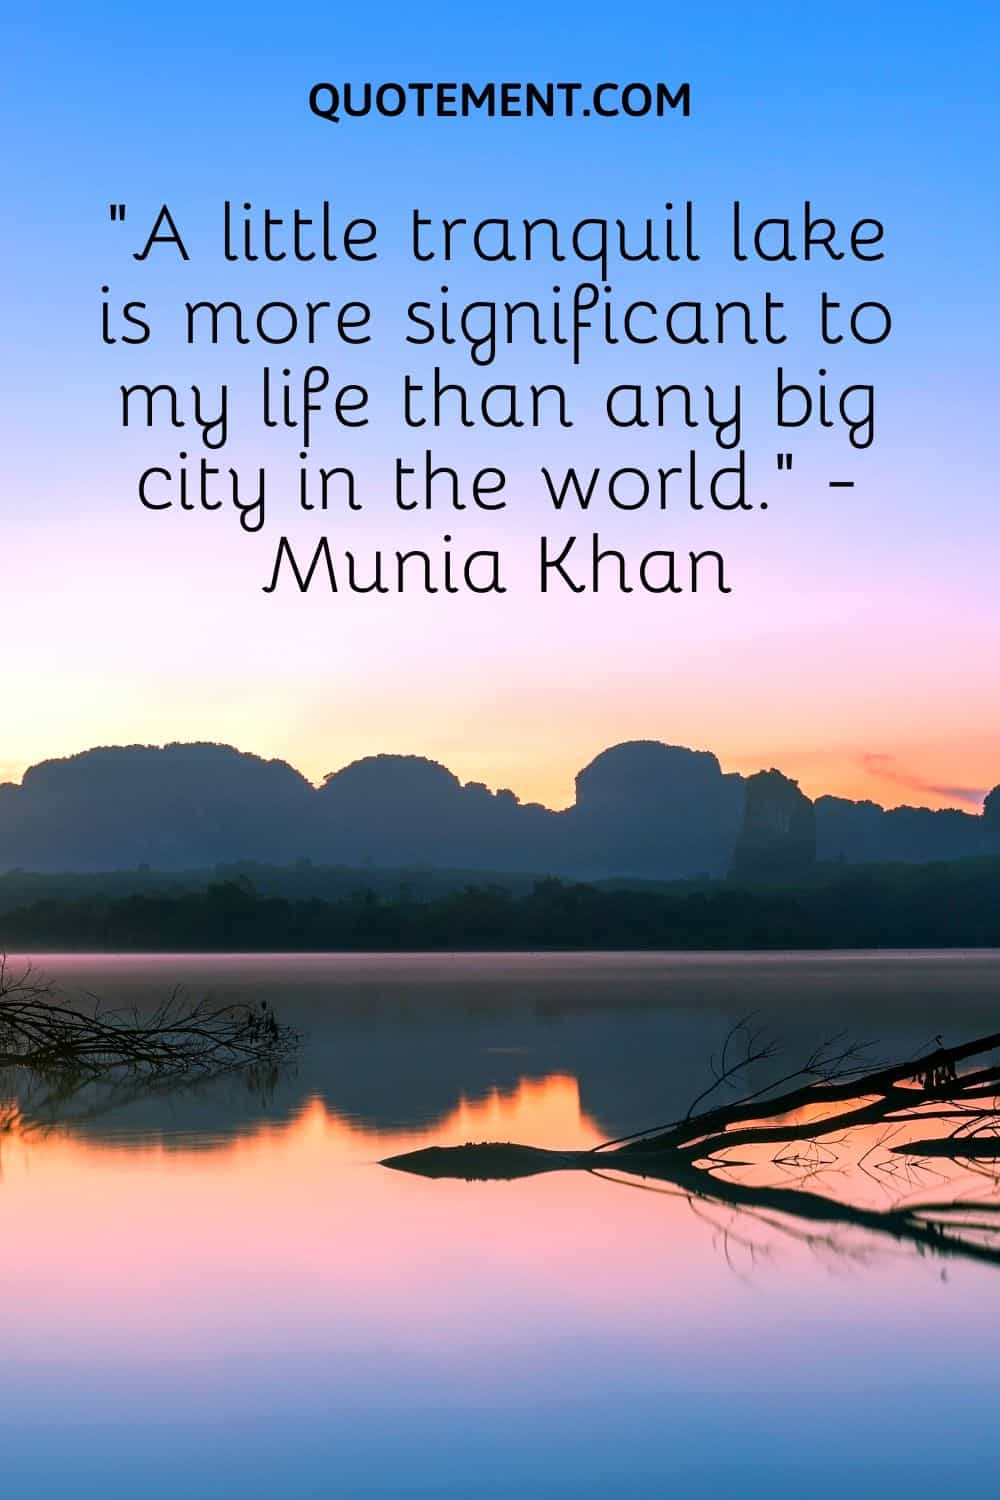 “A little tranquil lake is more significant to my life than any big city in the world.” - Munia Khan